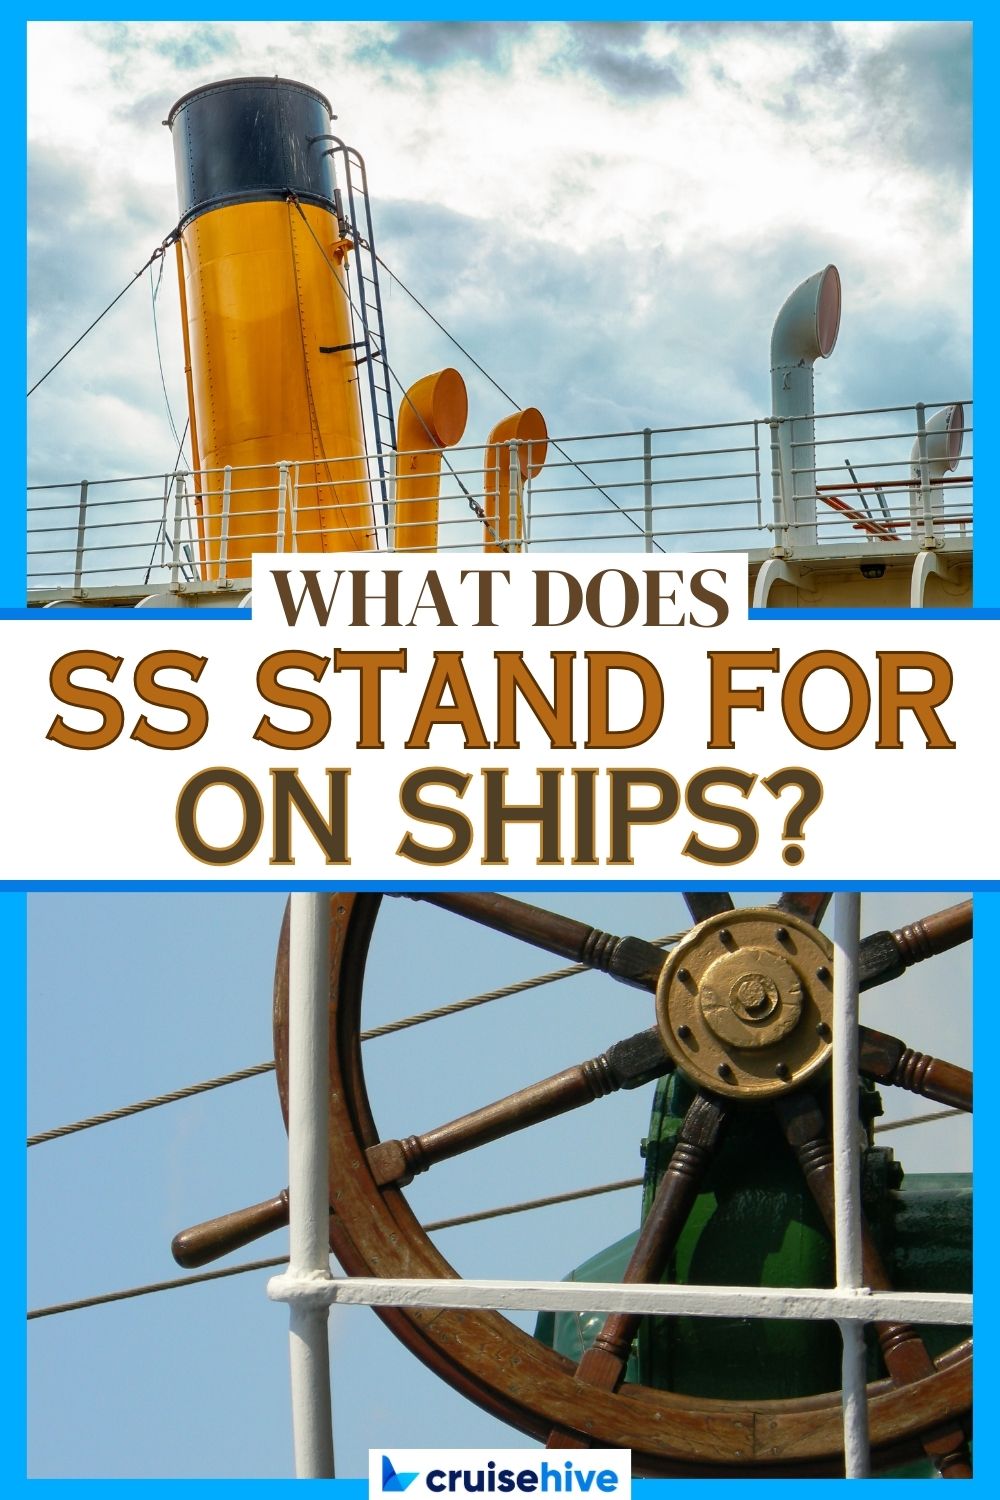 What Does SS Stand for on Ships